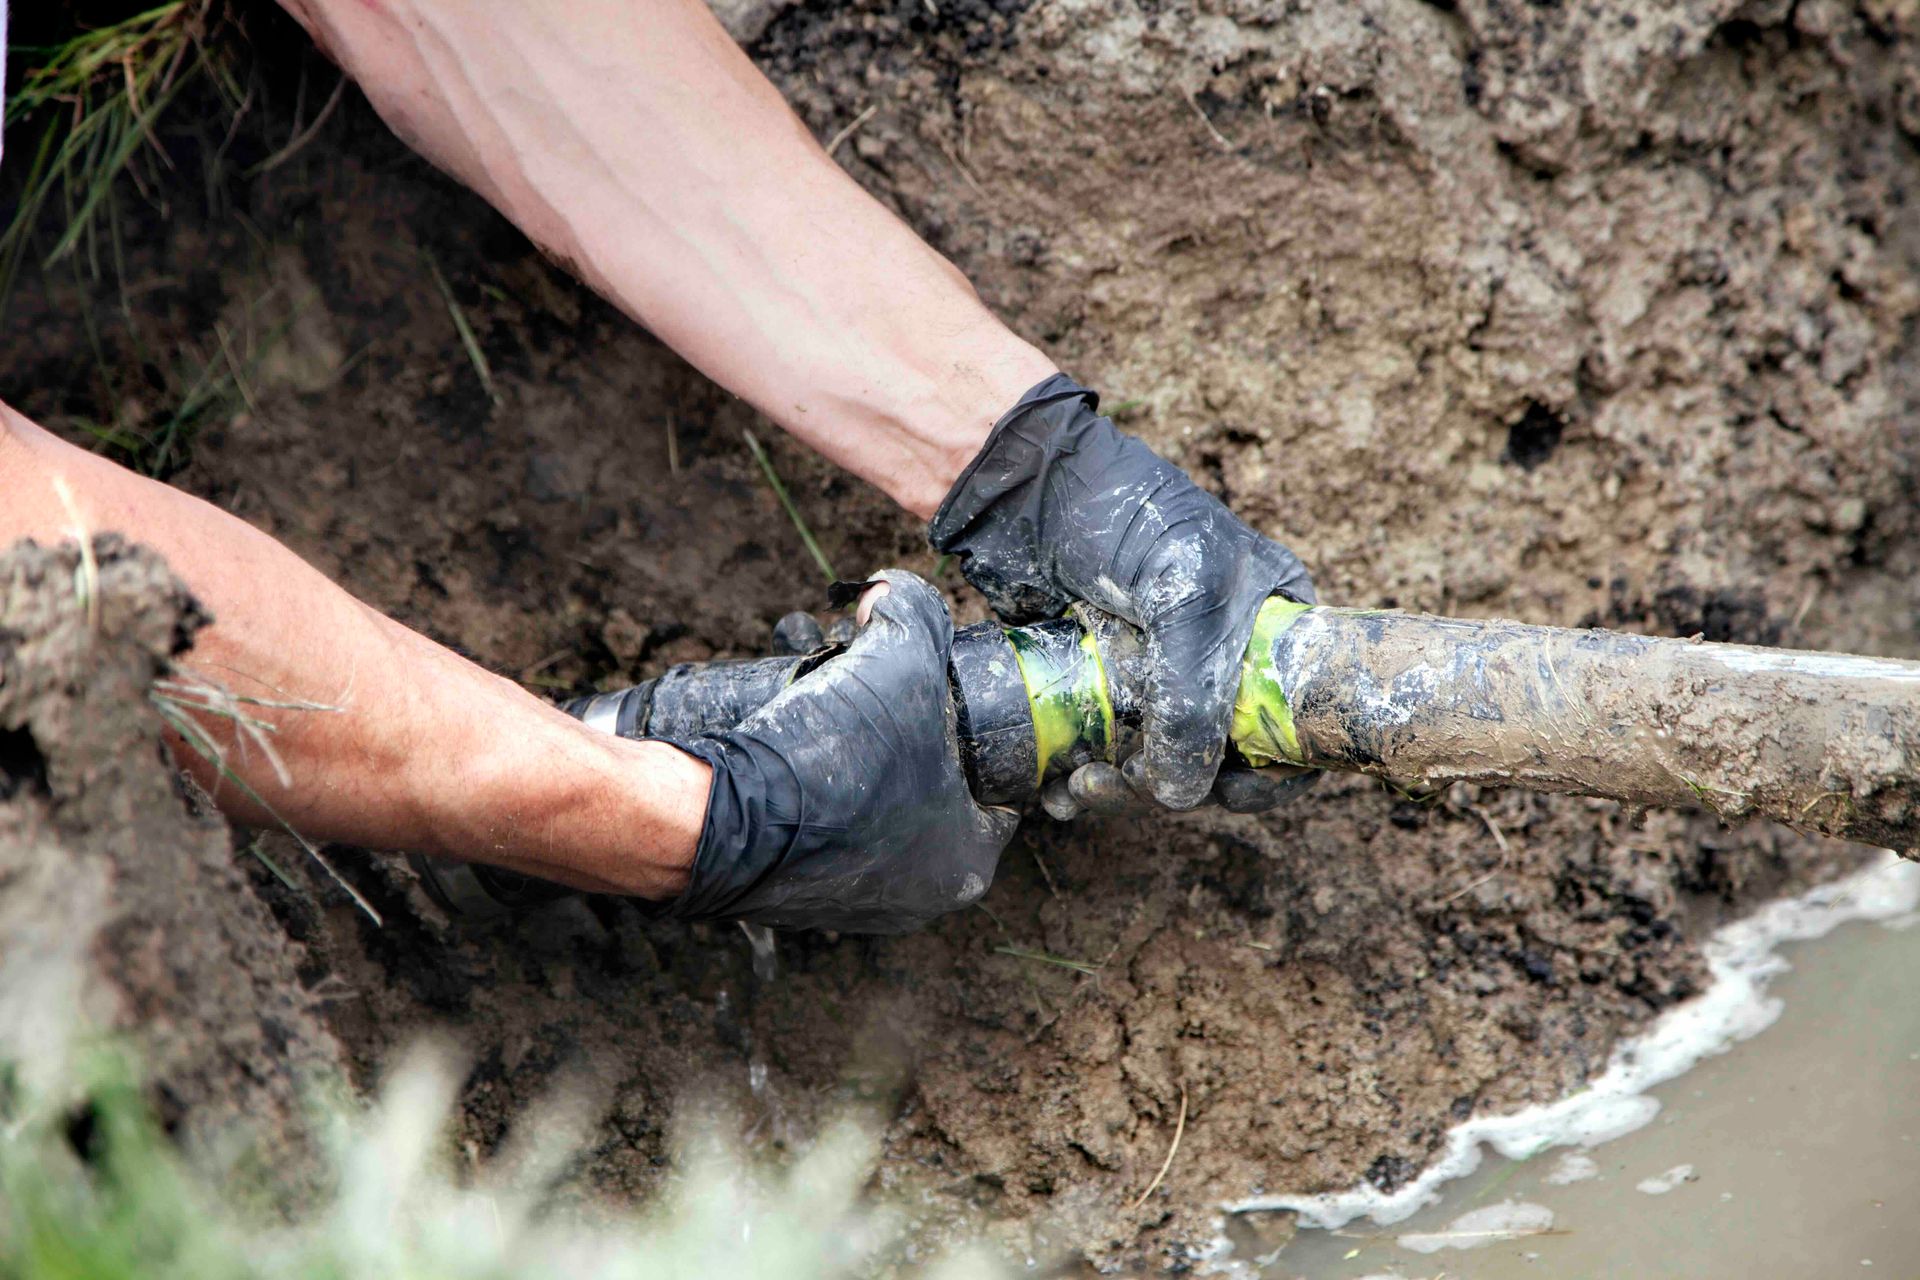 a person attaching two pipes together in mud with water by them.